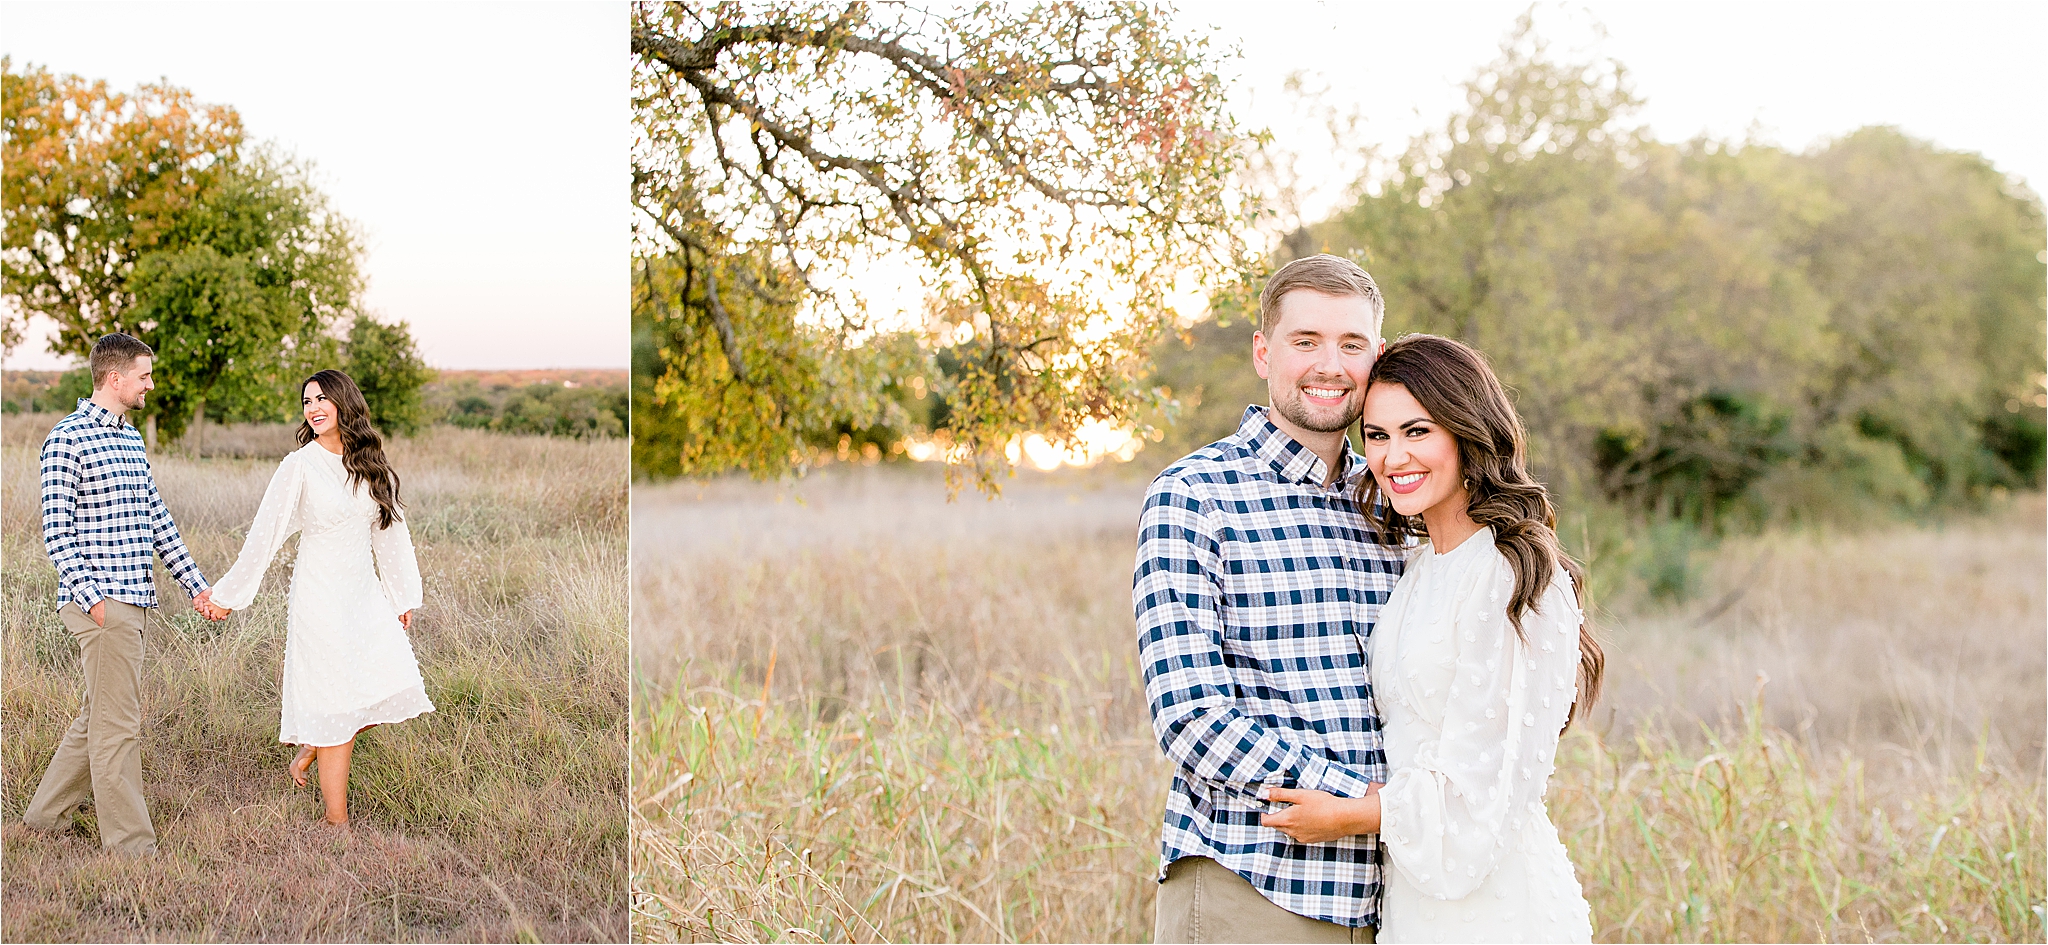 An engaged couple who will marry at villa di Felicita in Tyler, Texas embraces in a field at sunset for the fall engagement session